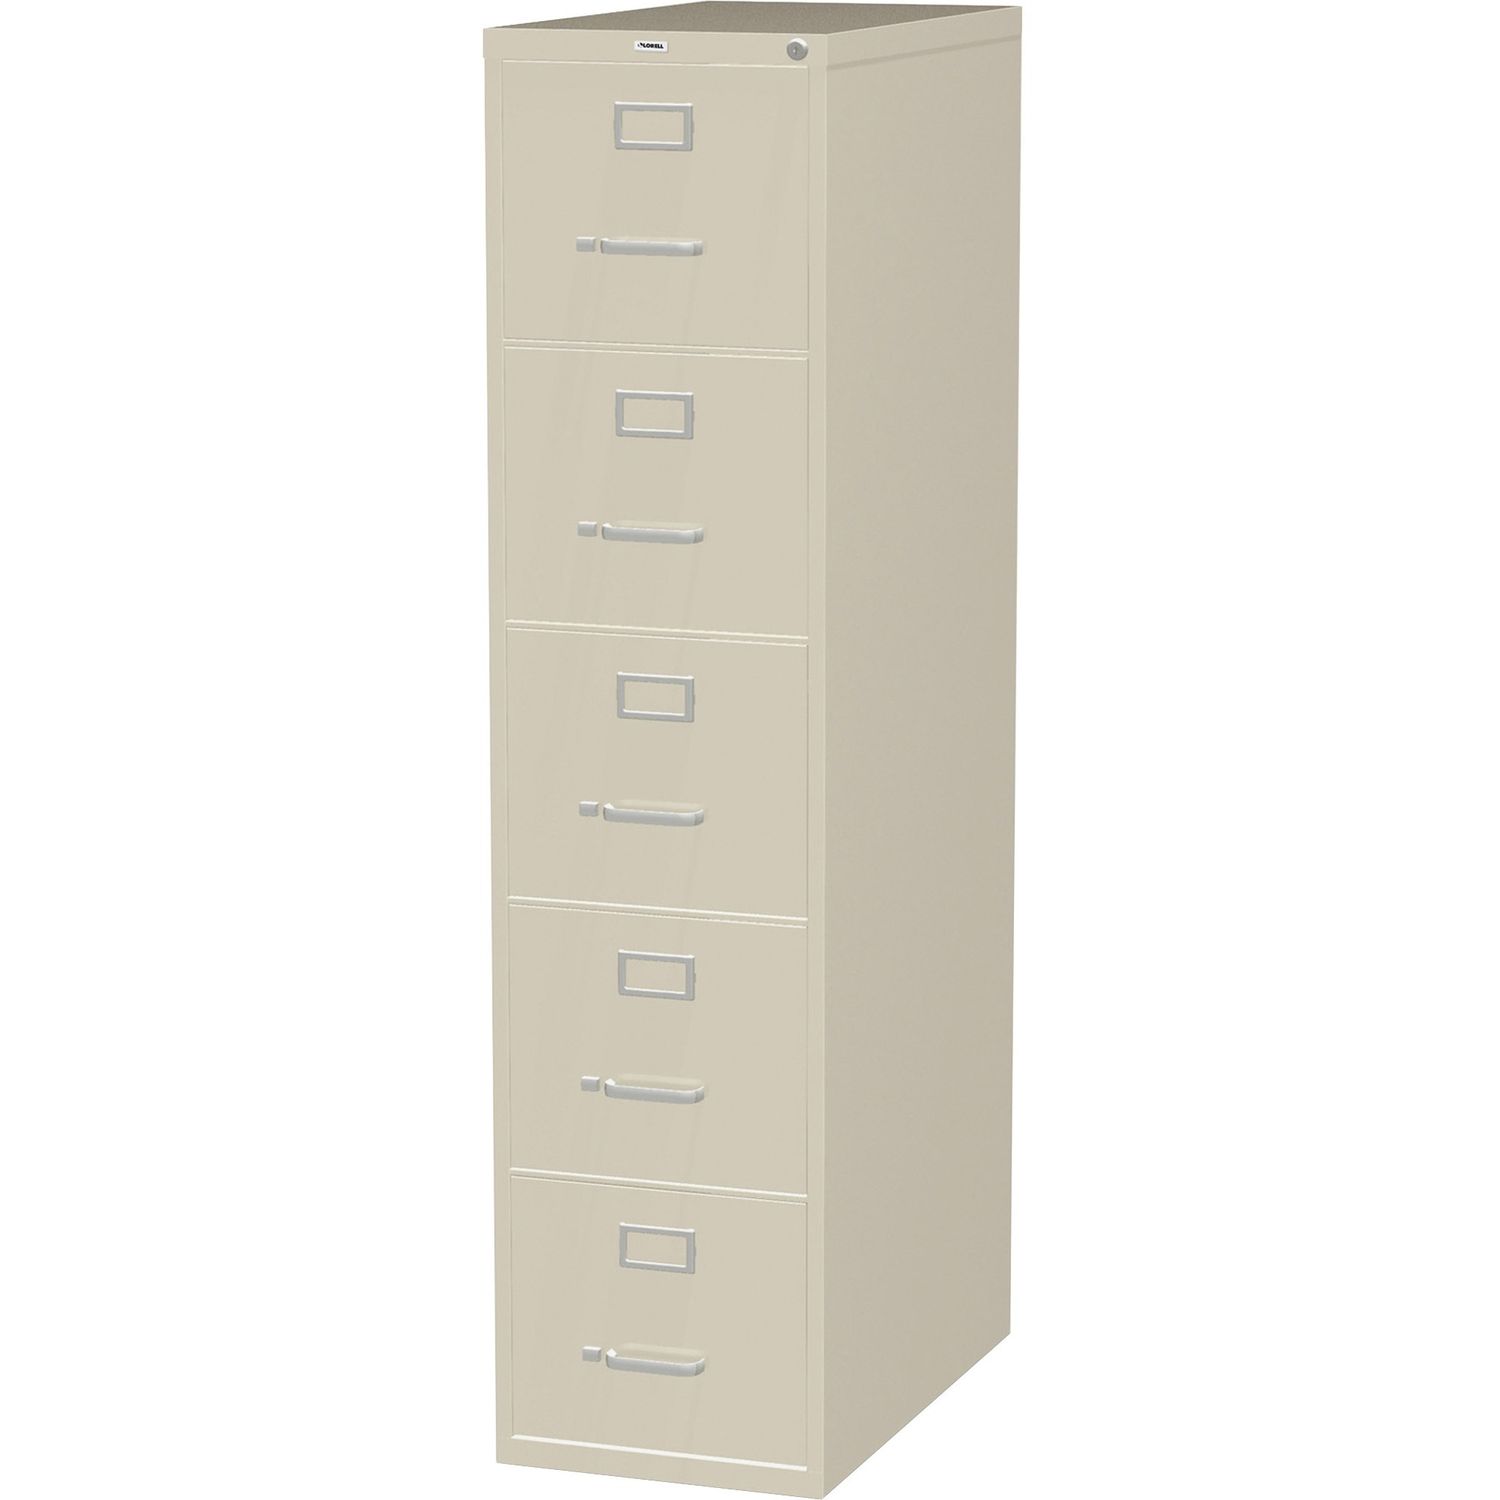 Commercial Grade Vertical File Cabinet - 5-Drawer 15" x 26.5" x 61", 5 x Drawer(s) for File, Letter